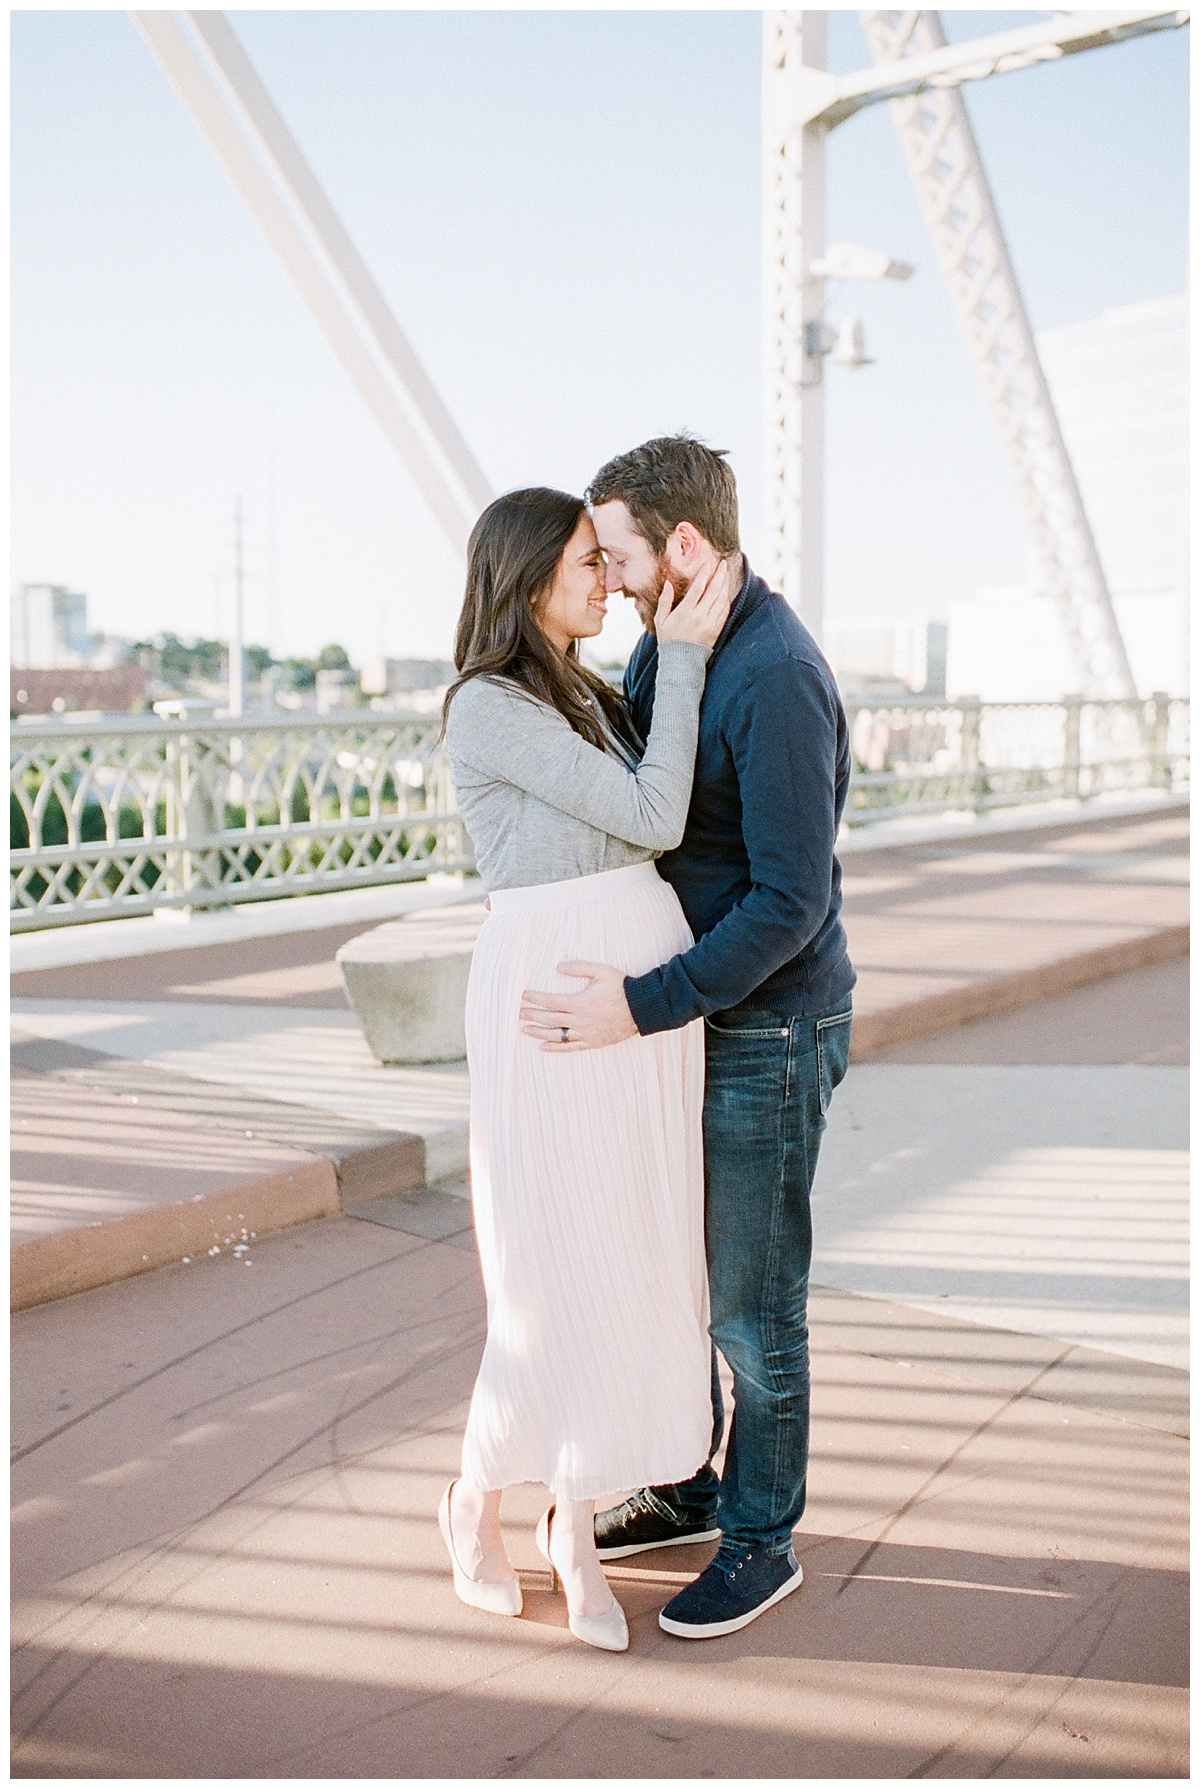 Maternity Photo Shoot in Downtown Nashville with photographer Grace Paul.